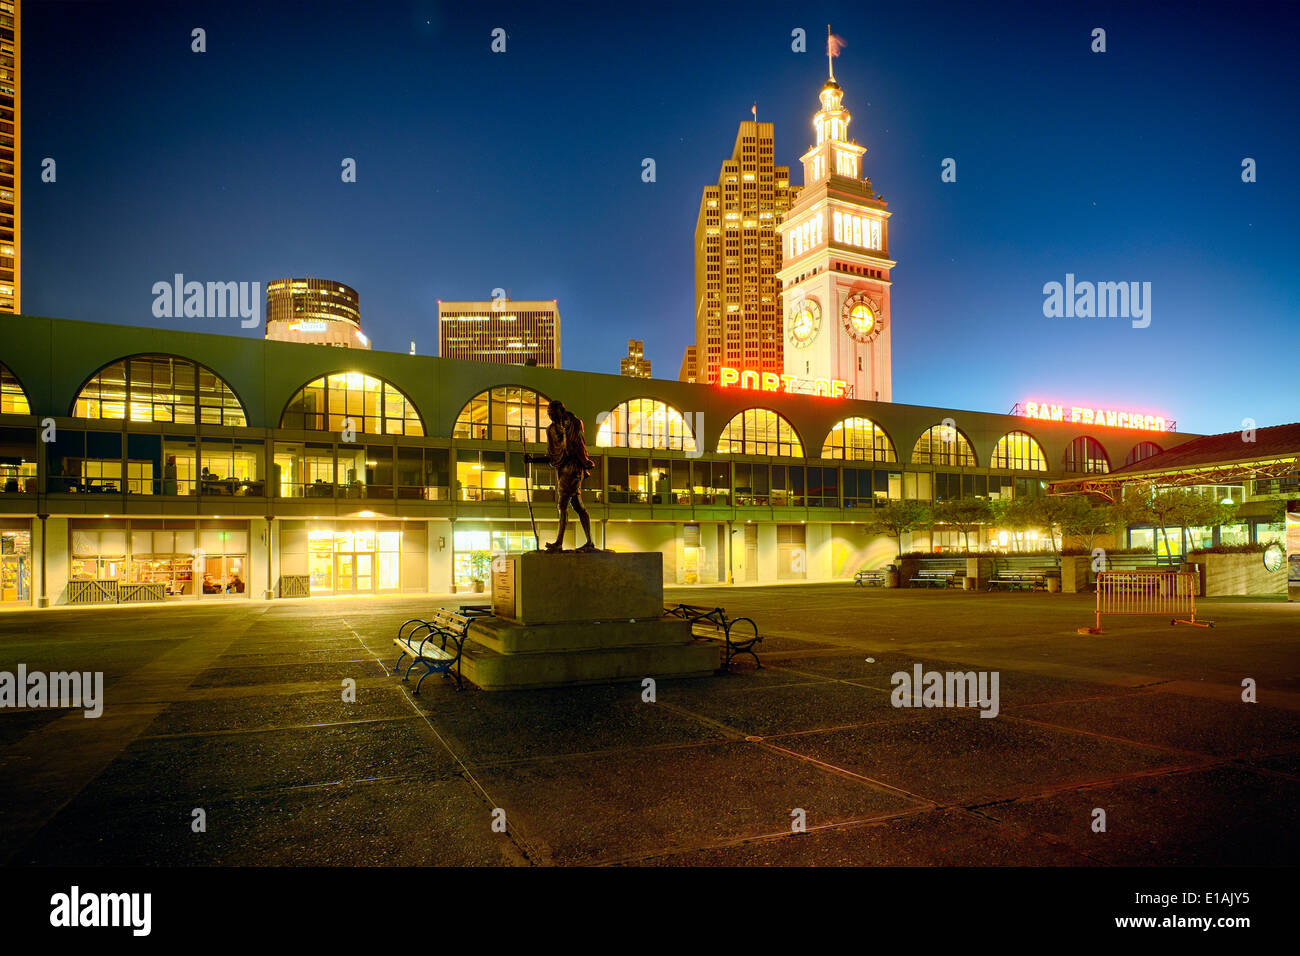 Low Angle View of the Ferry Building Clock Tower and Marketplace Building at Night, San Francisco, California Stock Photo